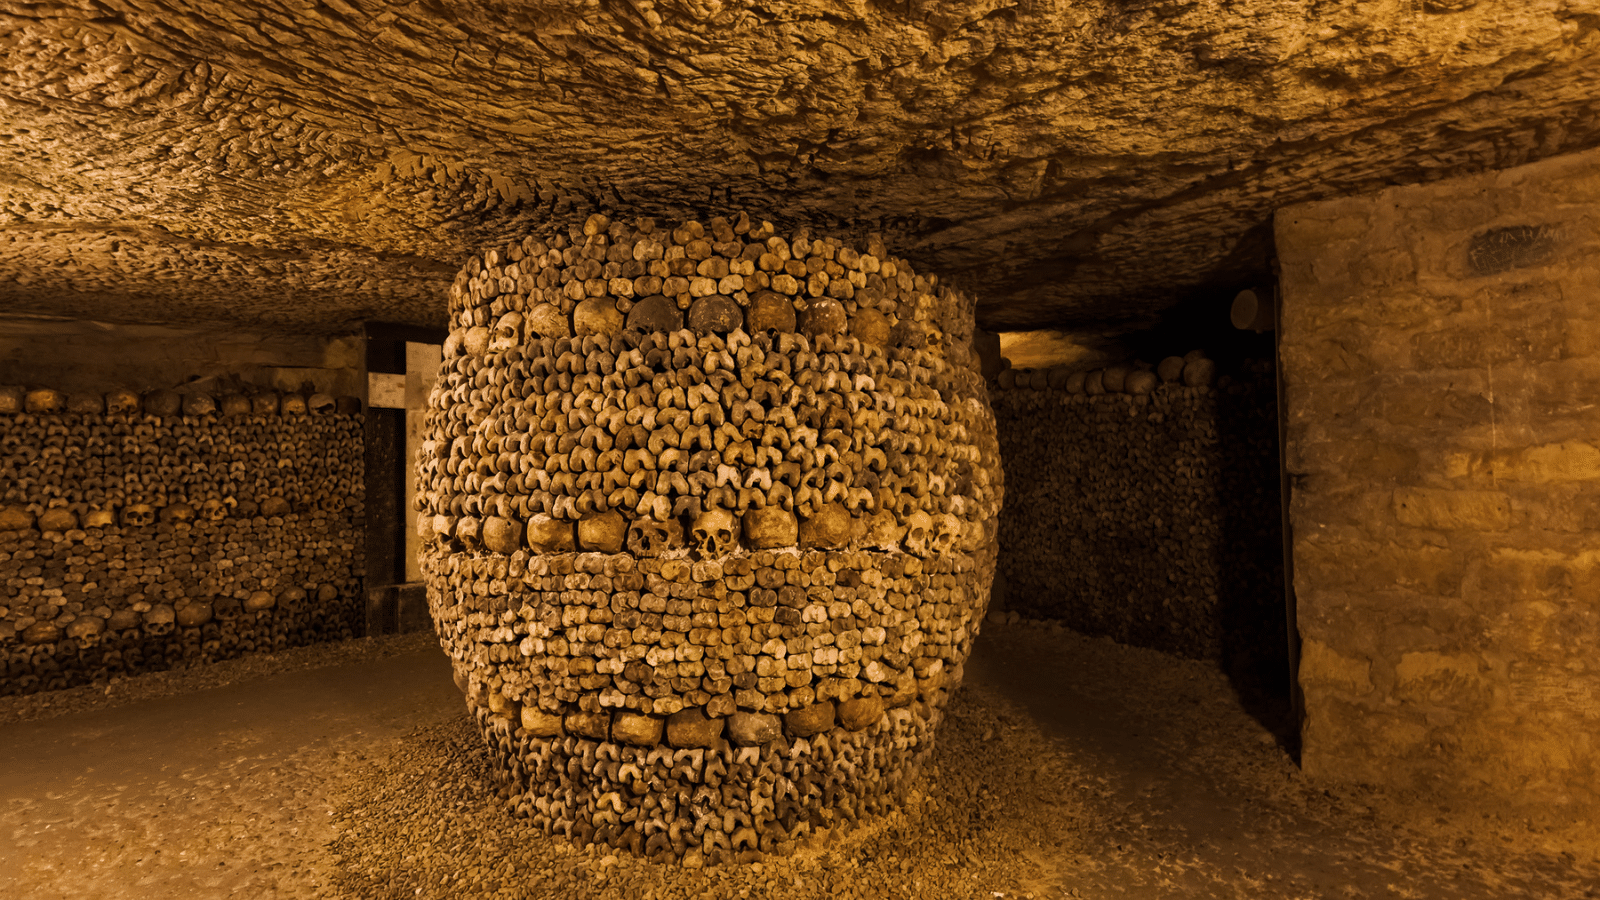 <p><span>The burial site of over six million Parisians might not seem like an ideal tourist attraction, but visiting The Catacombs of Paris is an experience unlike any other. It offers a unique glimpse into the city’s history as you walk through the dimly lit tunnels lined with bones. </span></p>